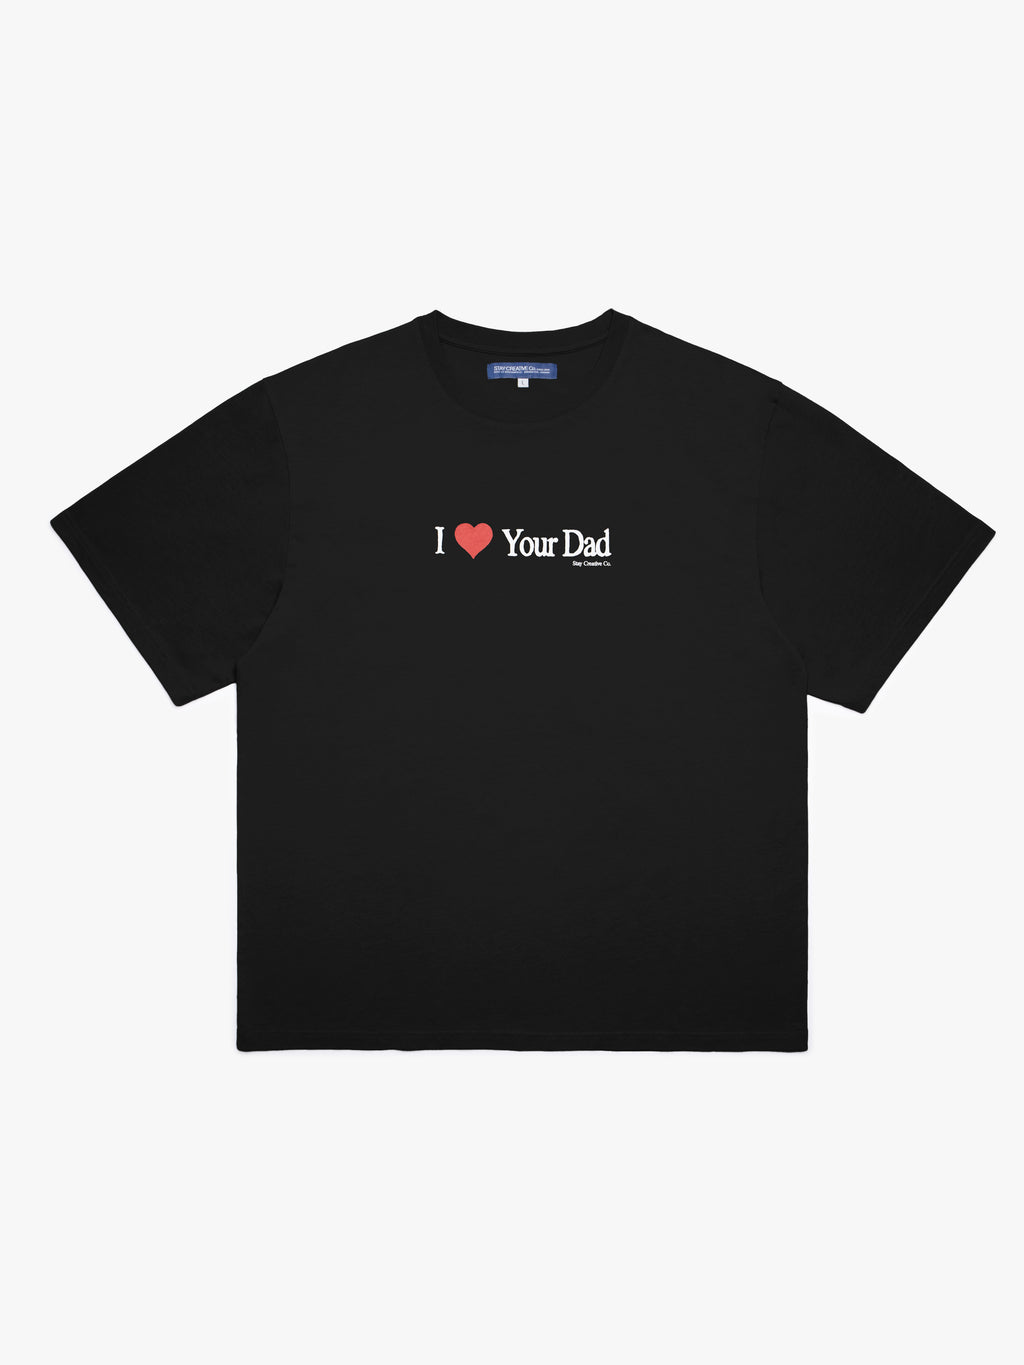 I Love Your Dad T-Shirt - Black